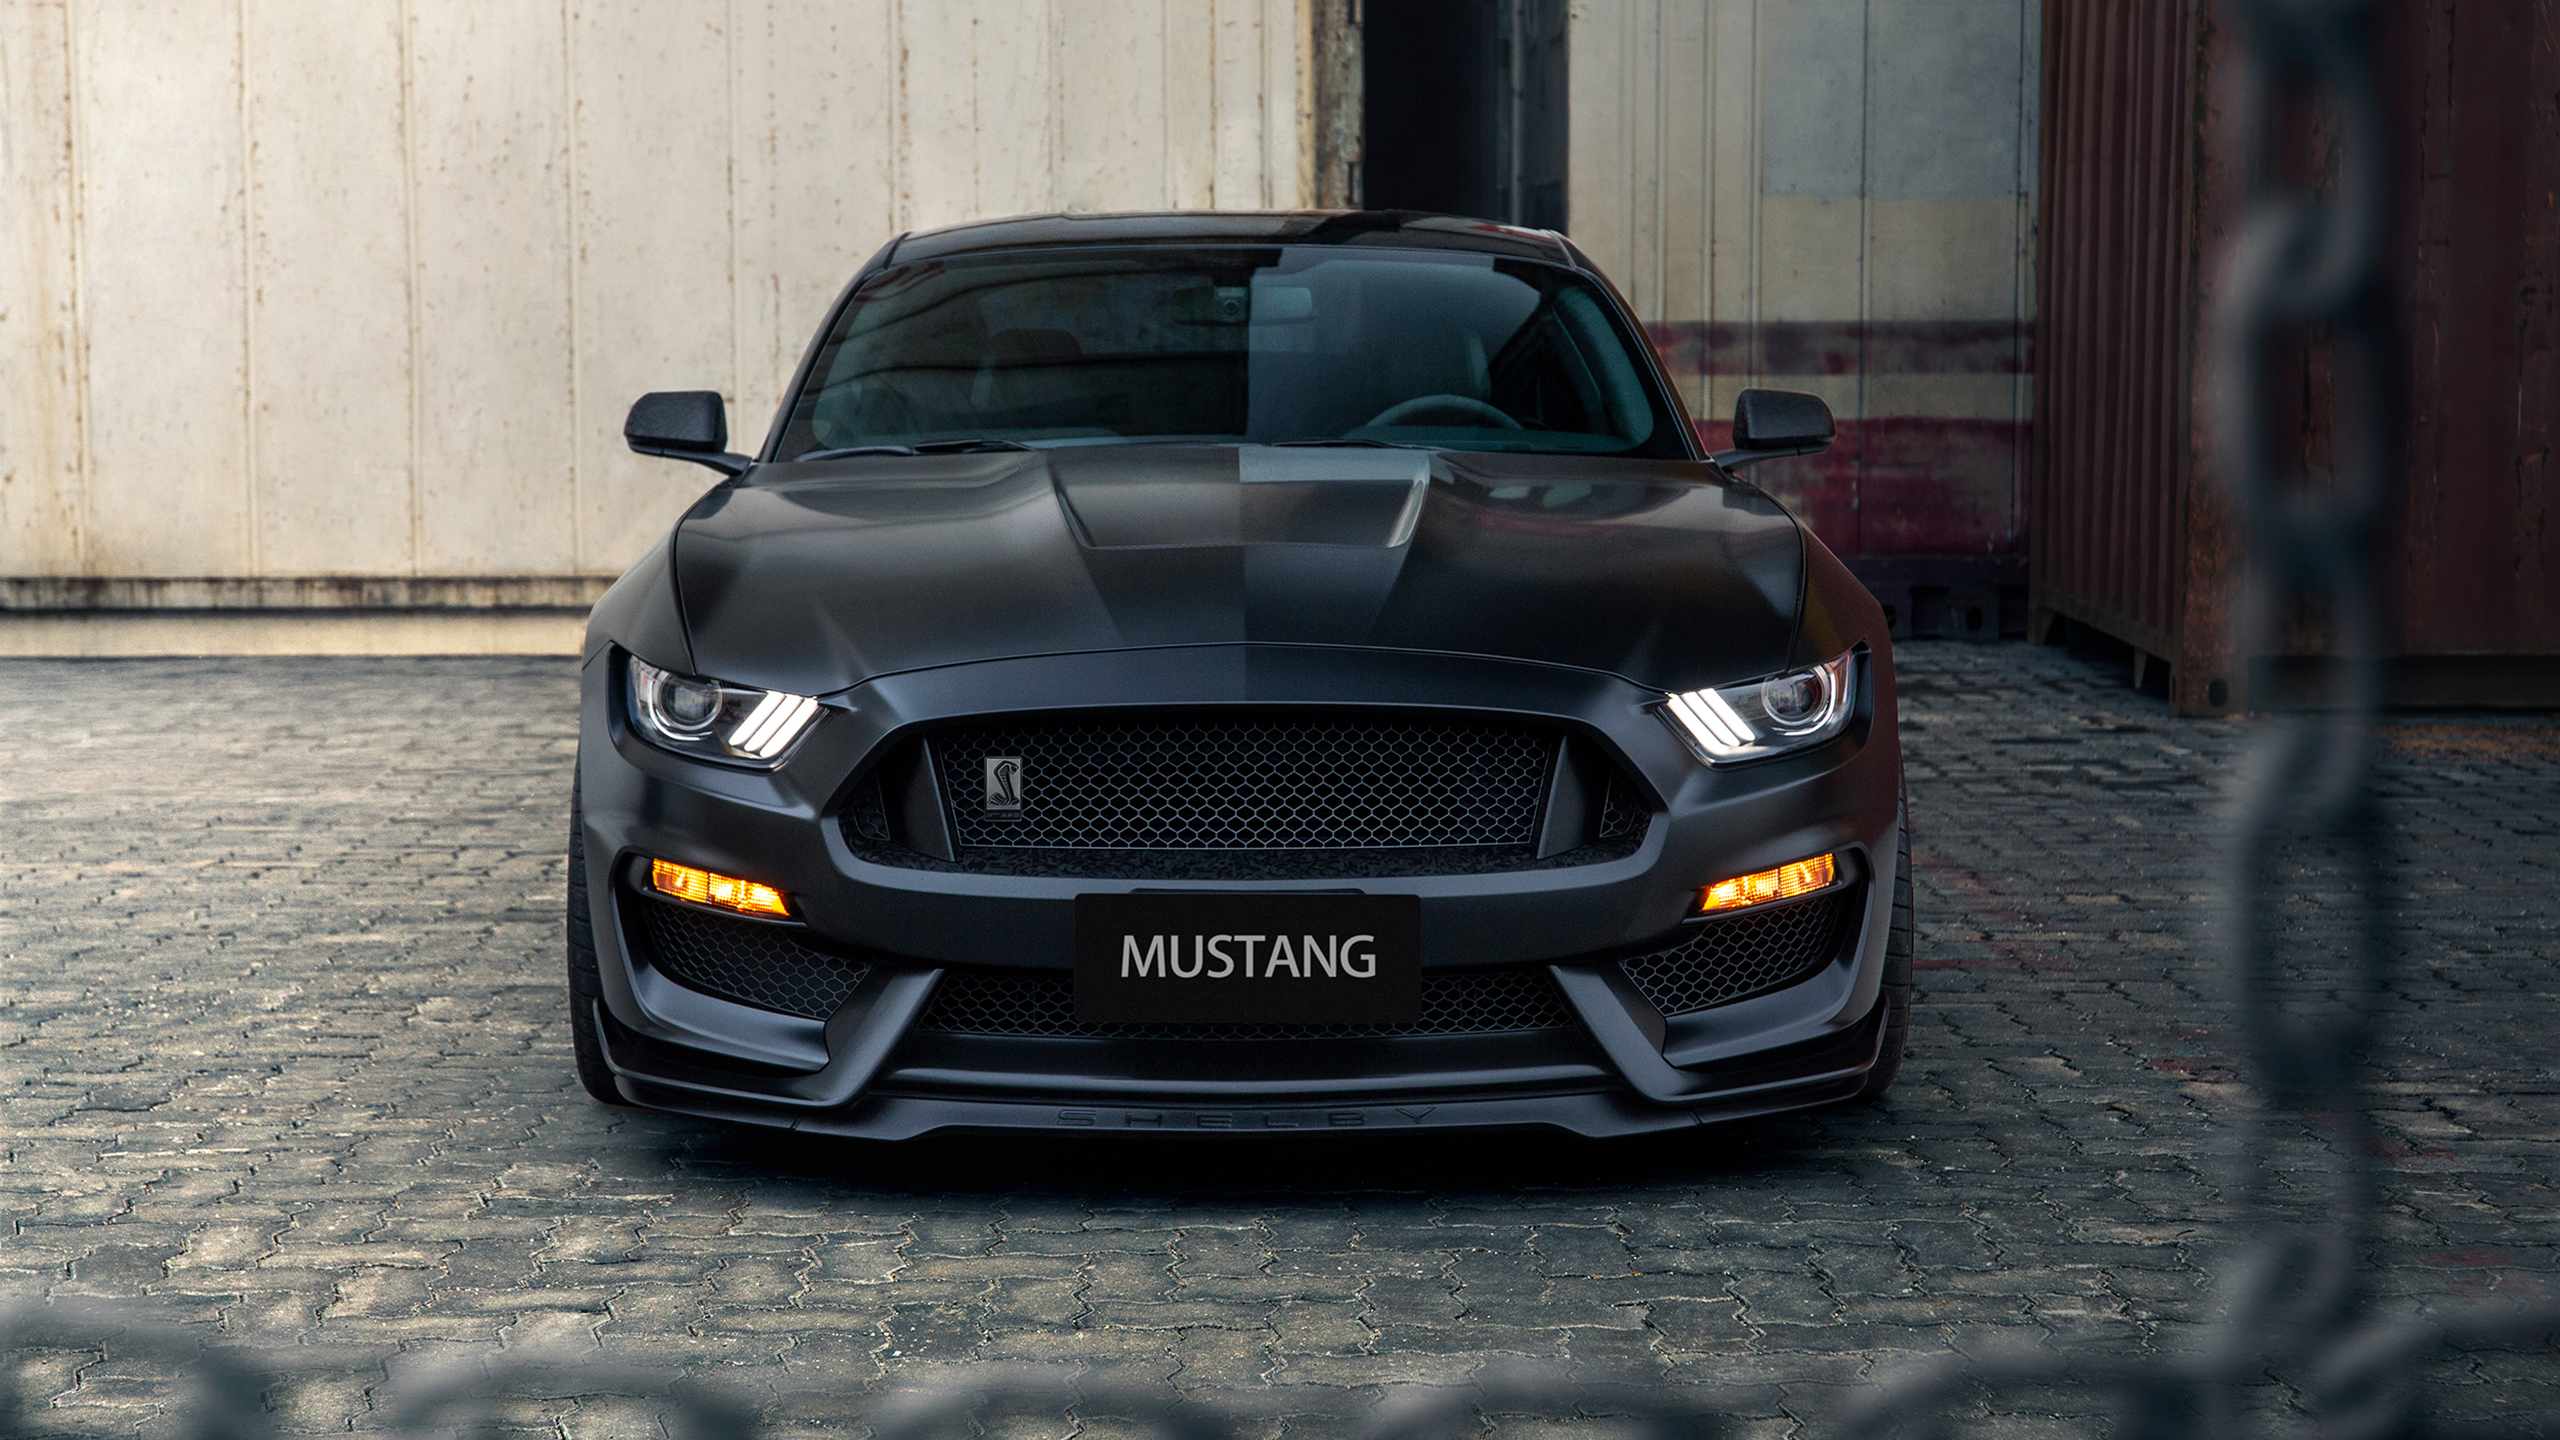 Ford Mustang Shelby GT350 2 Wallpaper | HD Car Wallpapers ...